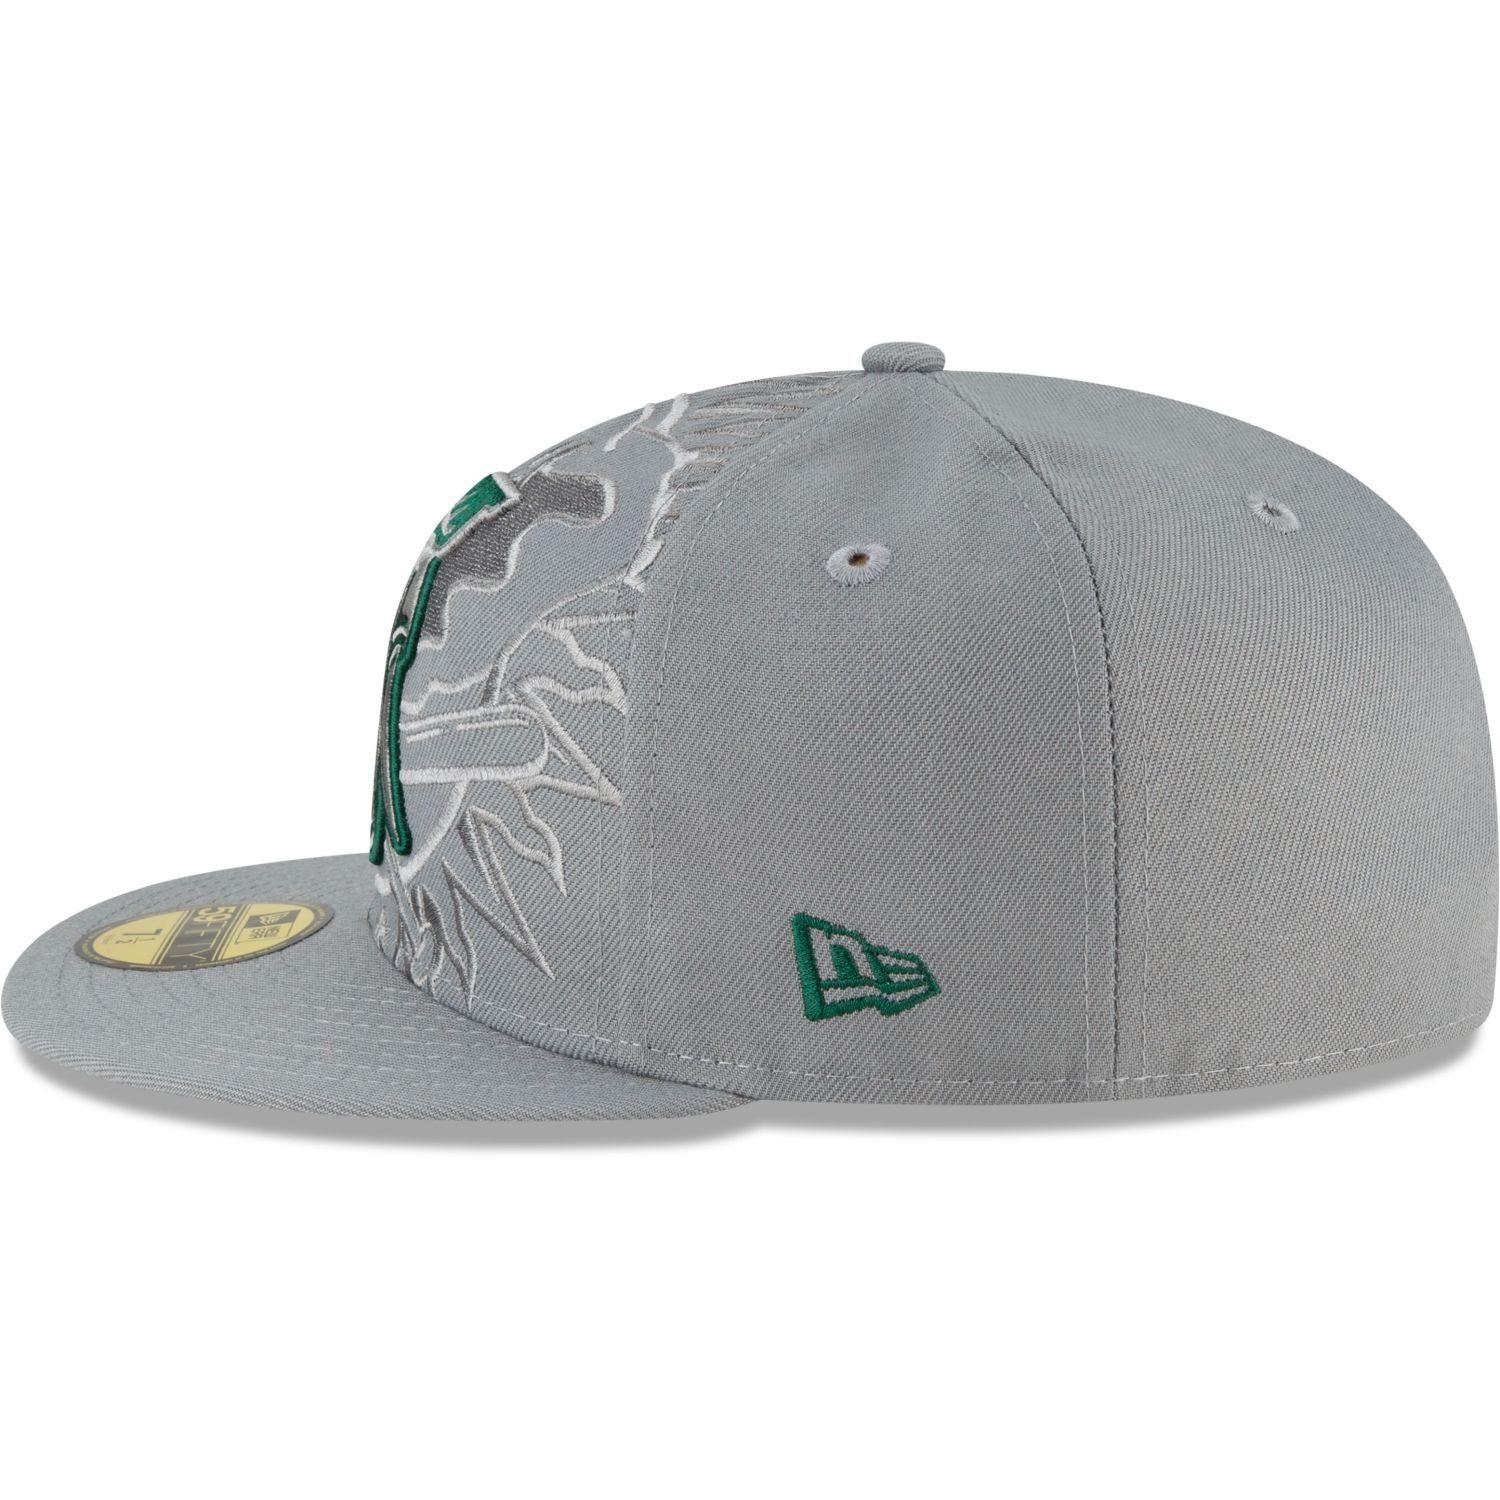 GREY Oakland Cap New Team 59Fifty Athletics MLB STORM Era Cooperstown Fitted